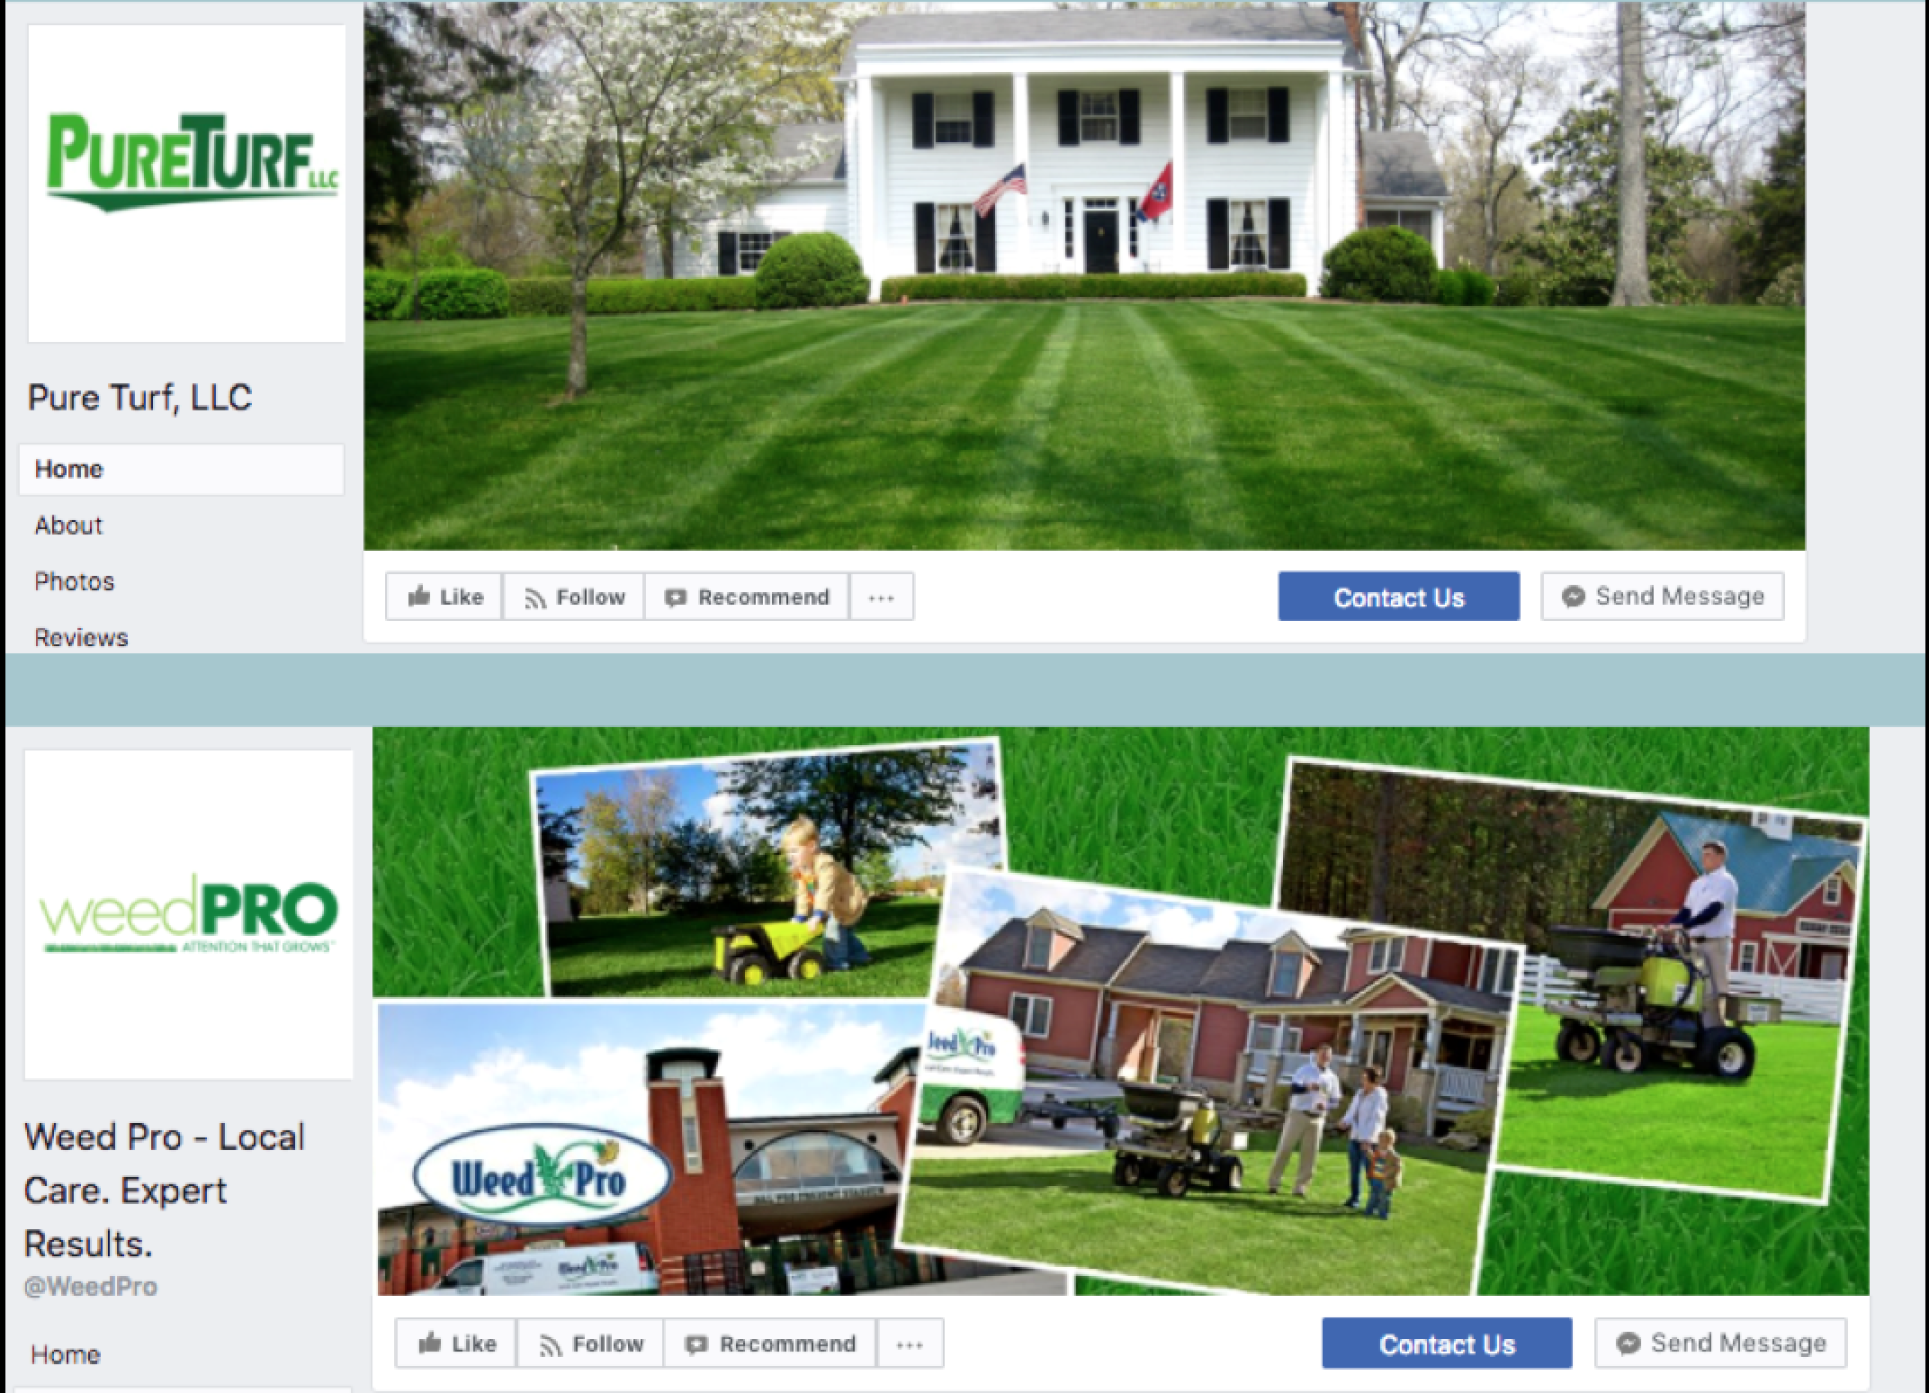 Six Facebook Marketing Tips For Lawn Care Companies